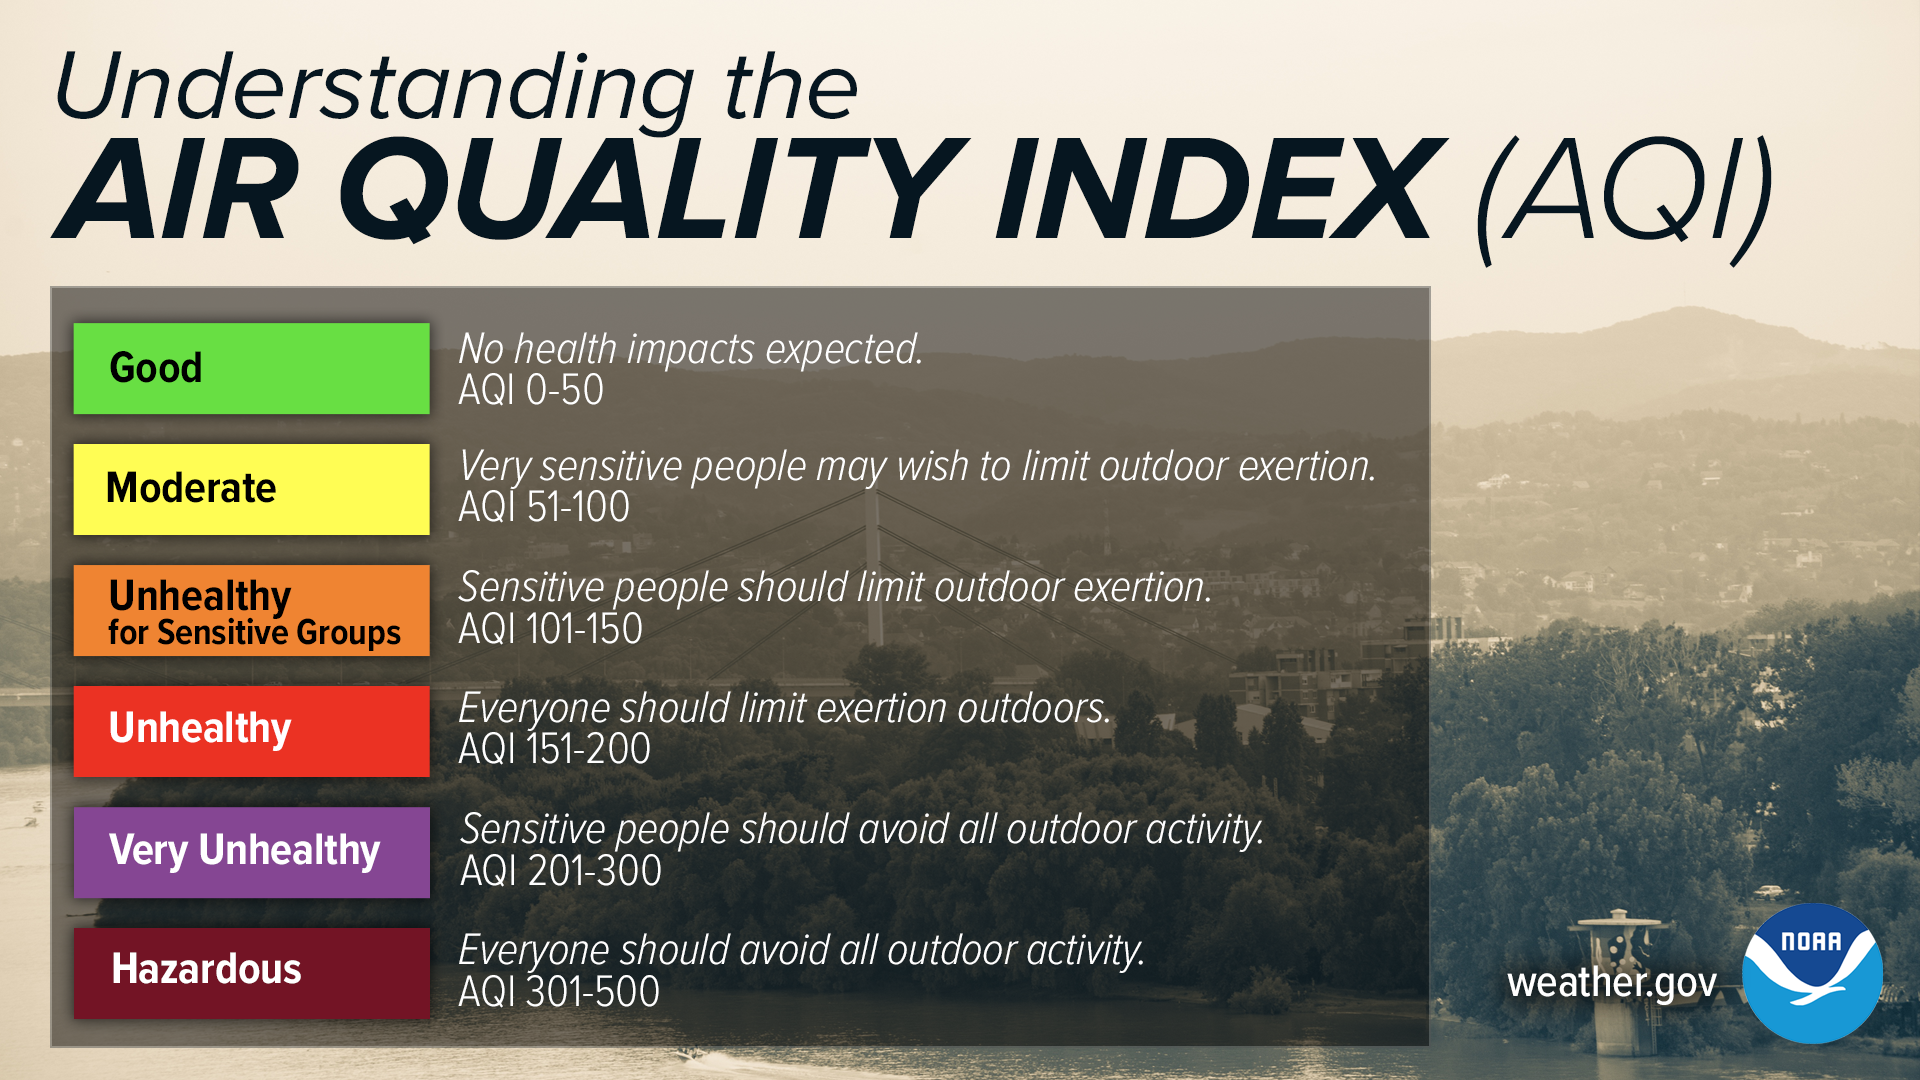 Understanding the Air Quality Index (AQI). AQI 0-50 is Good, no health impacts expected. AQI 51-100 is Moderate, very sensitive people may wish to limit outdoor exertion. AQI 101-150 is Unhealthy for sensitive groups, they should limit outdoor exertion. AQI 151-200 is Unhealthy, everyone should limit outdoor exertion. AQI 201-300 is Very Unhealthy, sensitive people should avoid all outdoor activity. AQI 301-500 is Hazardous, everyone should avoid all outdoor activity.